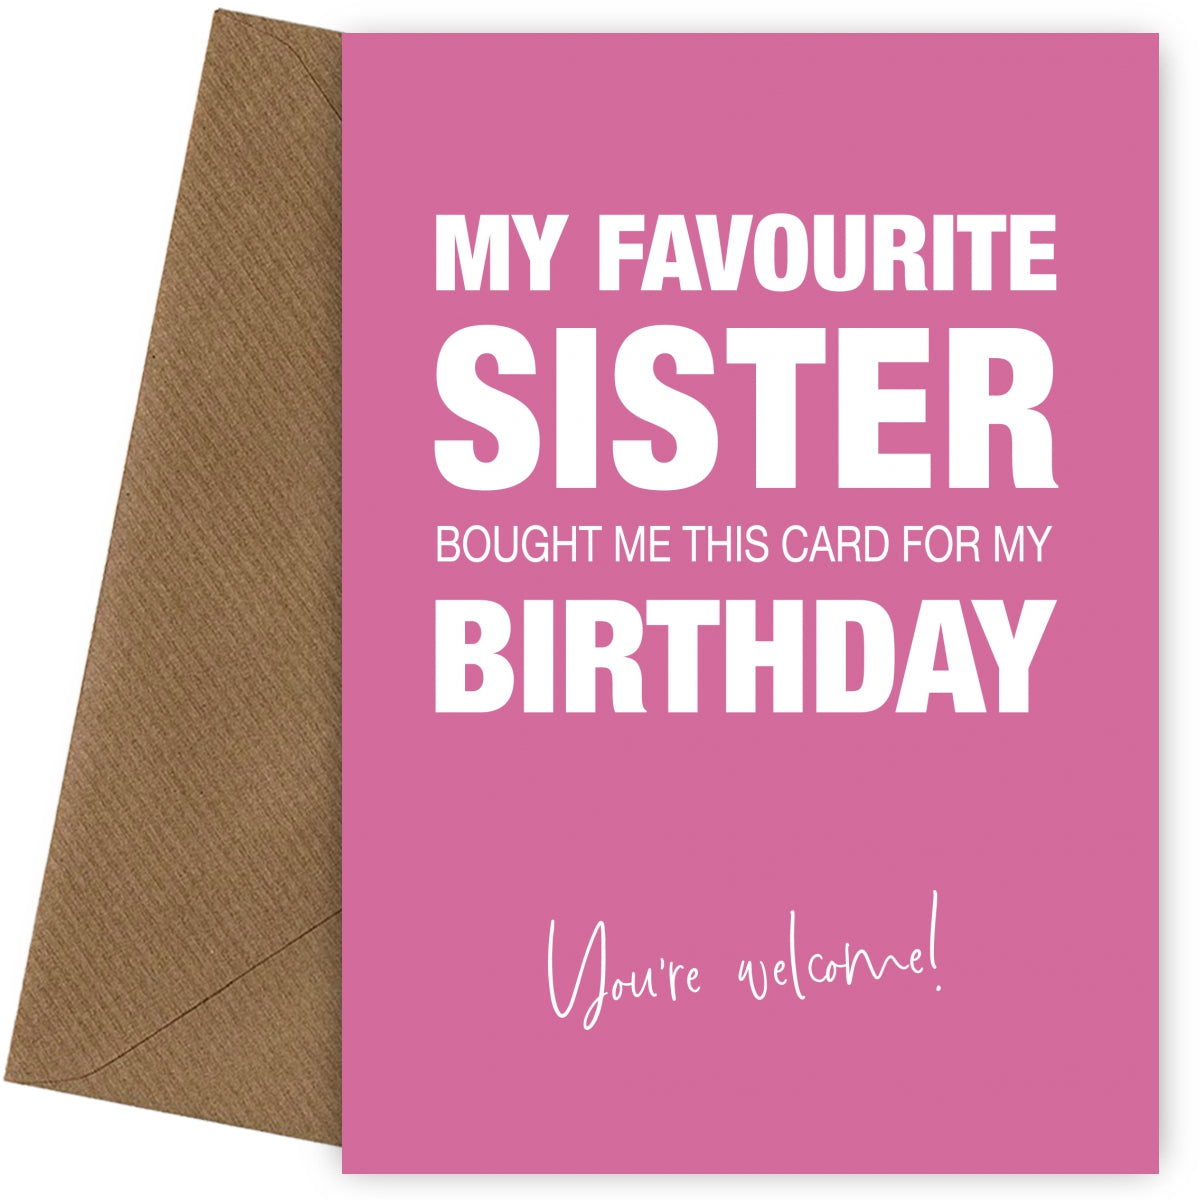 Funny Birthday Card for Brother or Sister - My Favourite Sister Gave Me This Card